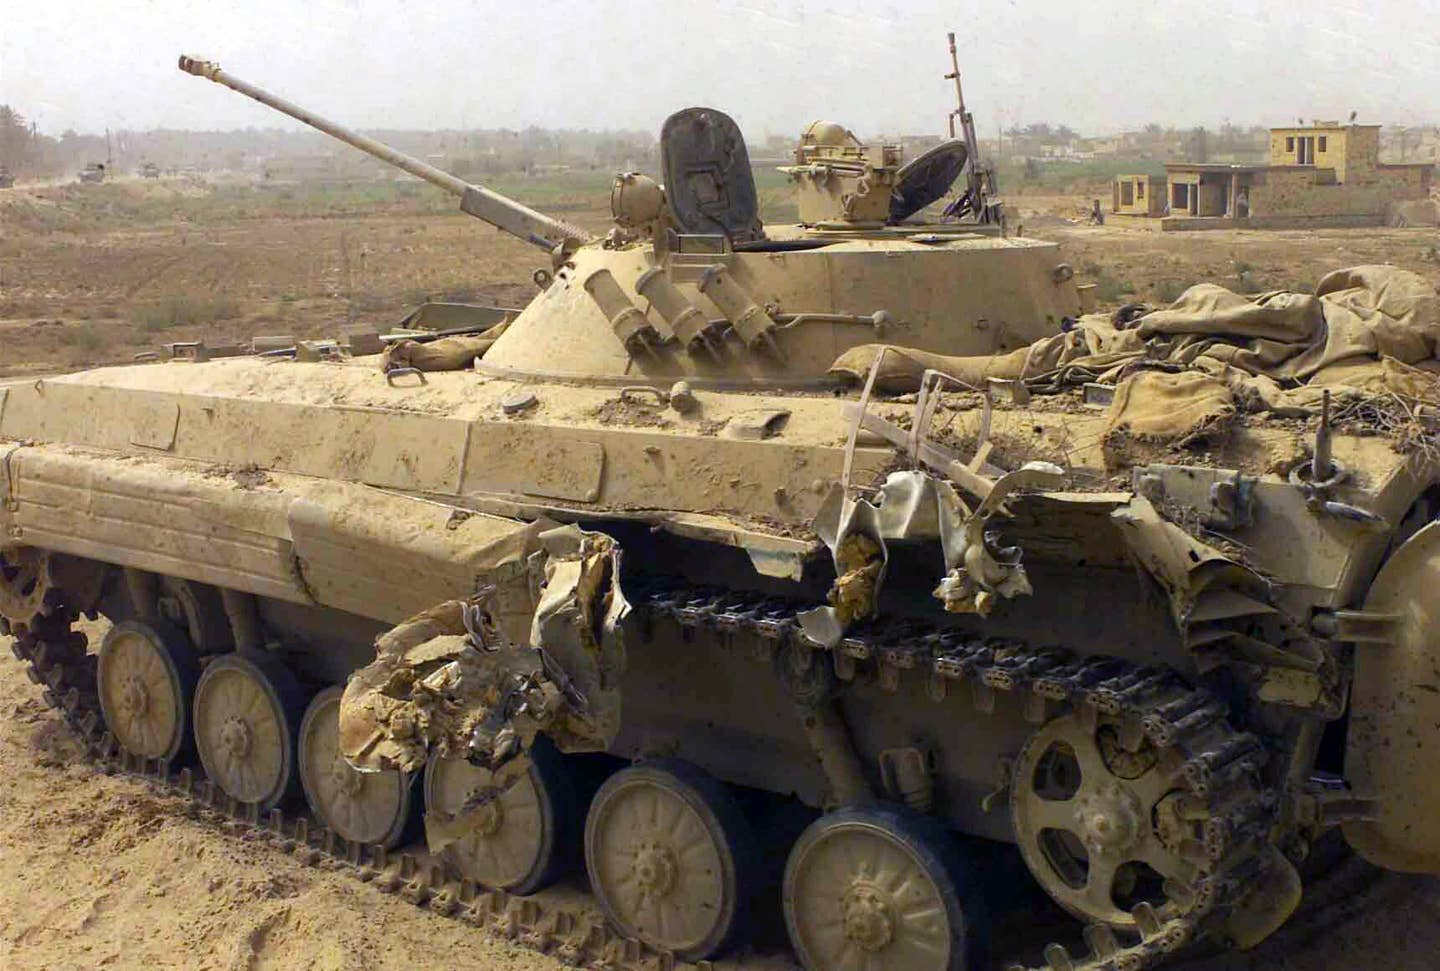 A partially destroyed abandoned Iraqi BMP-2 Infantry Fighting Vehicle sits along a roadside in Northern Iraq, during Operation Iraqi Freedom.